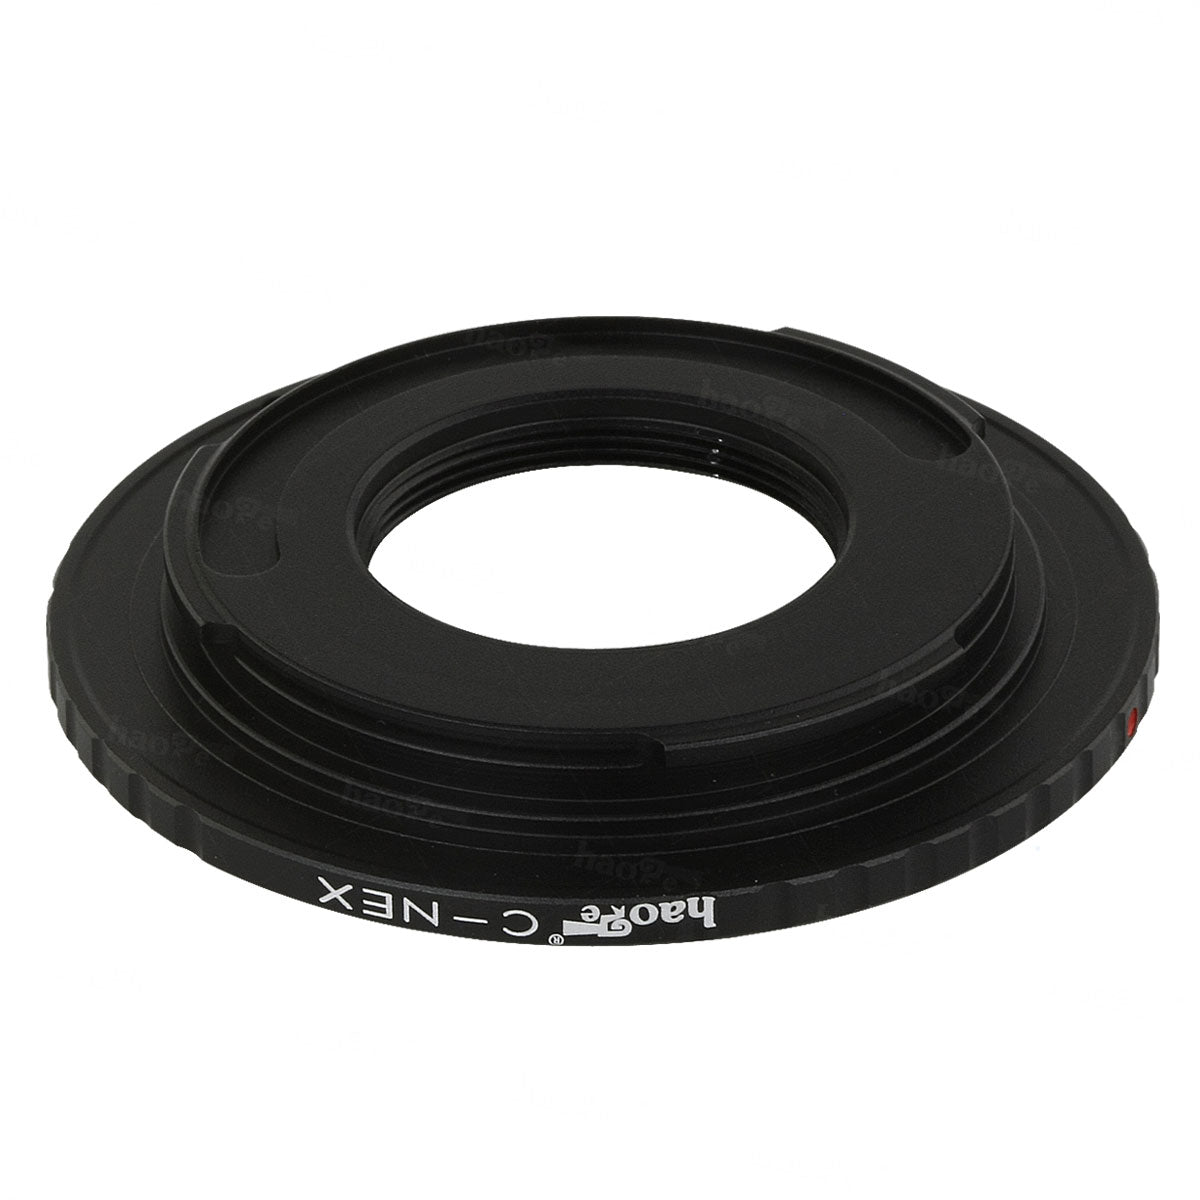 Haoge Lens Mount Adapter for C Mount CCTV TV Movie Lens to Sony E-mount NEX Camera such as NEX-3, NEX-5, NEX-5N, NEX-7, NEX-7N, NEX-C3, NEX-F3, a6300, a6000, a5000, a3500, a3000, NEX-VG10, VG20